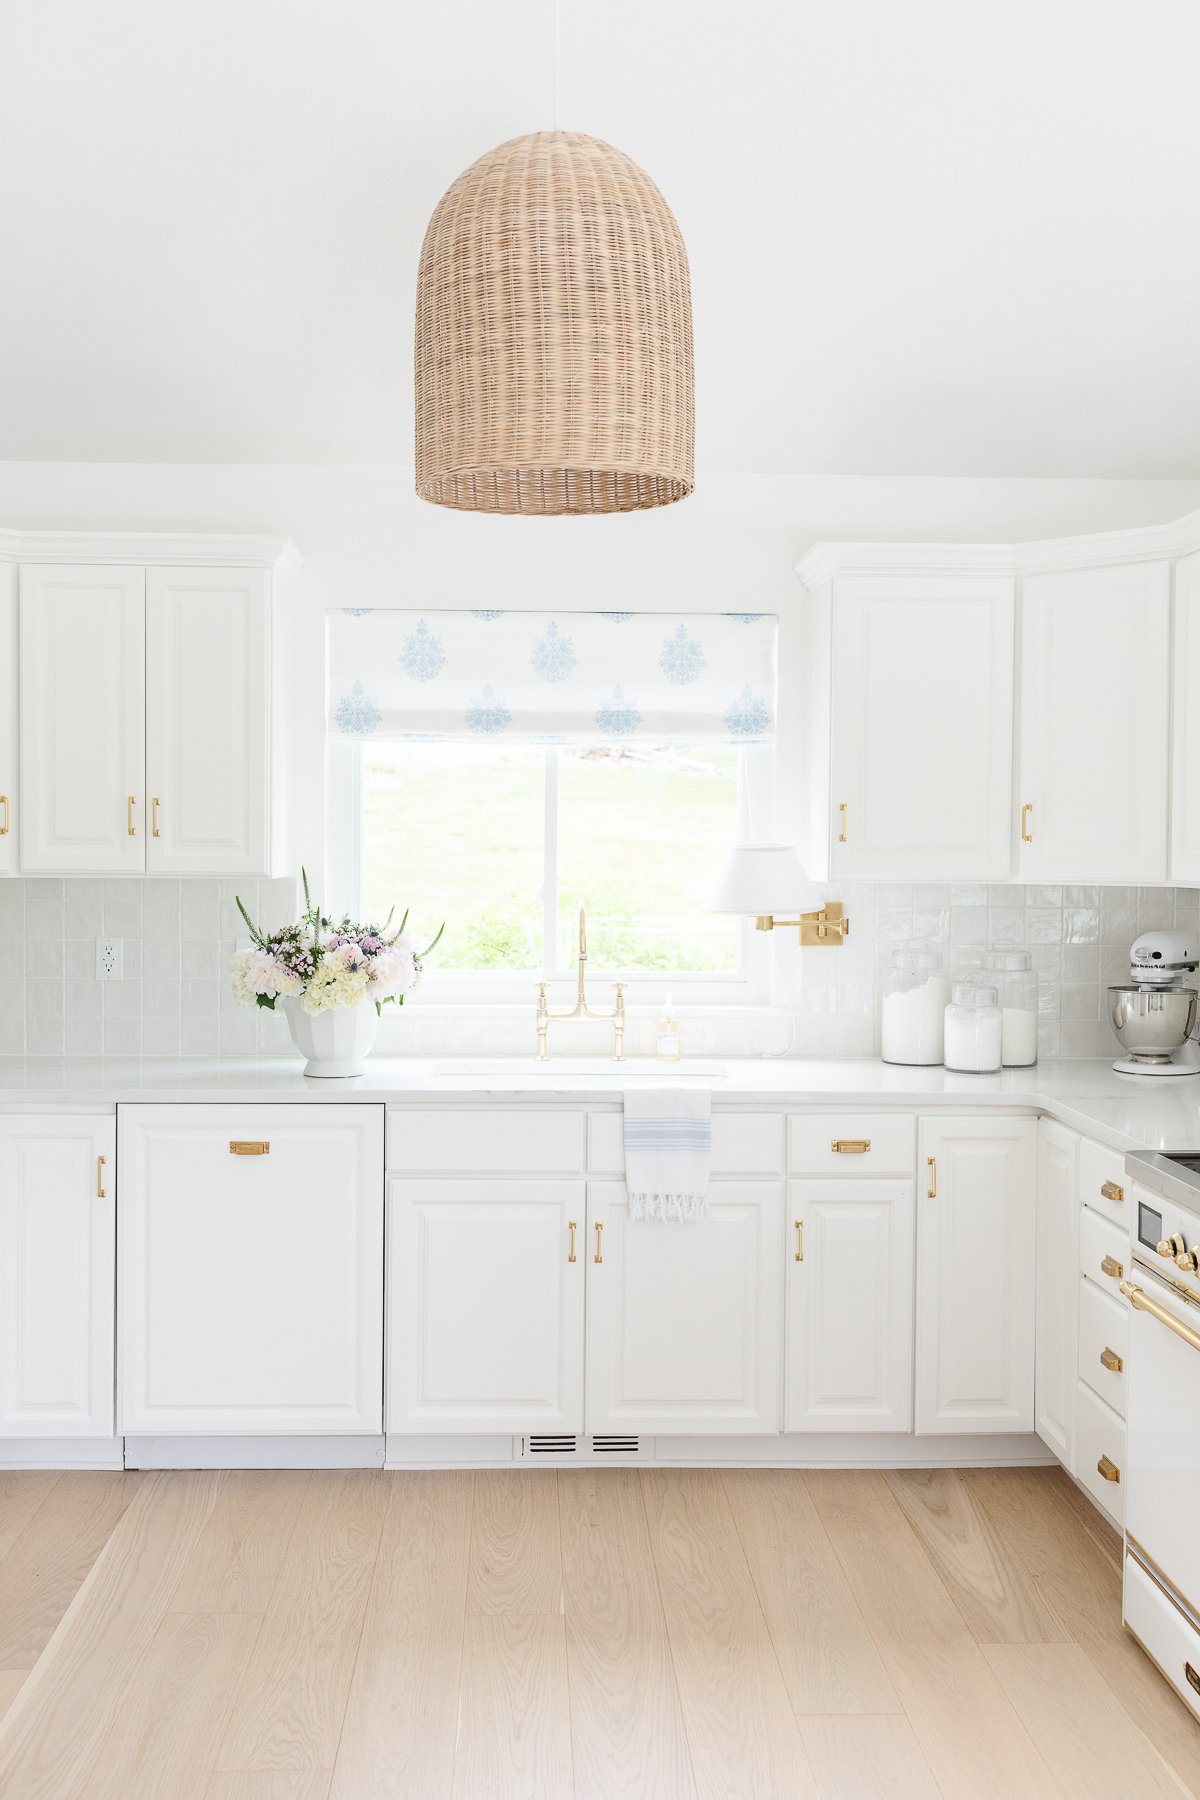 A white kitchen with rattan light fixture